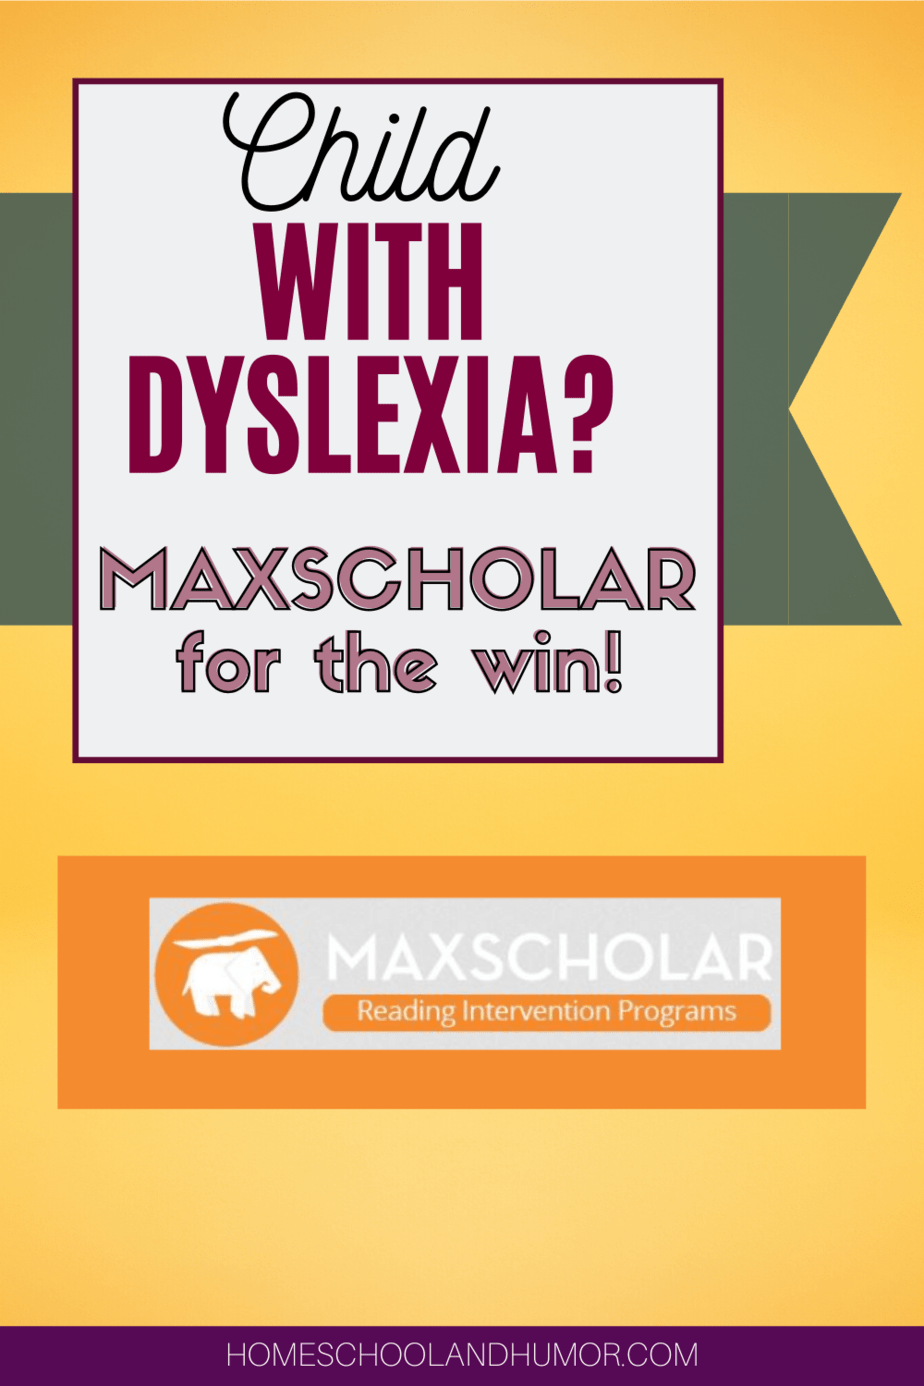 How To Teach Your Struggling Reader To Read Using MaxScholar {Review}